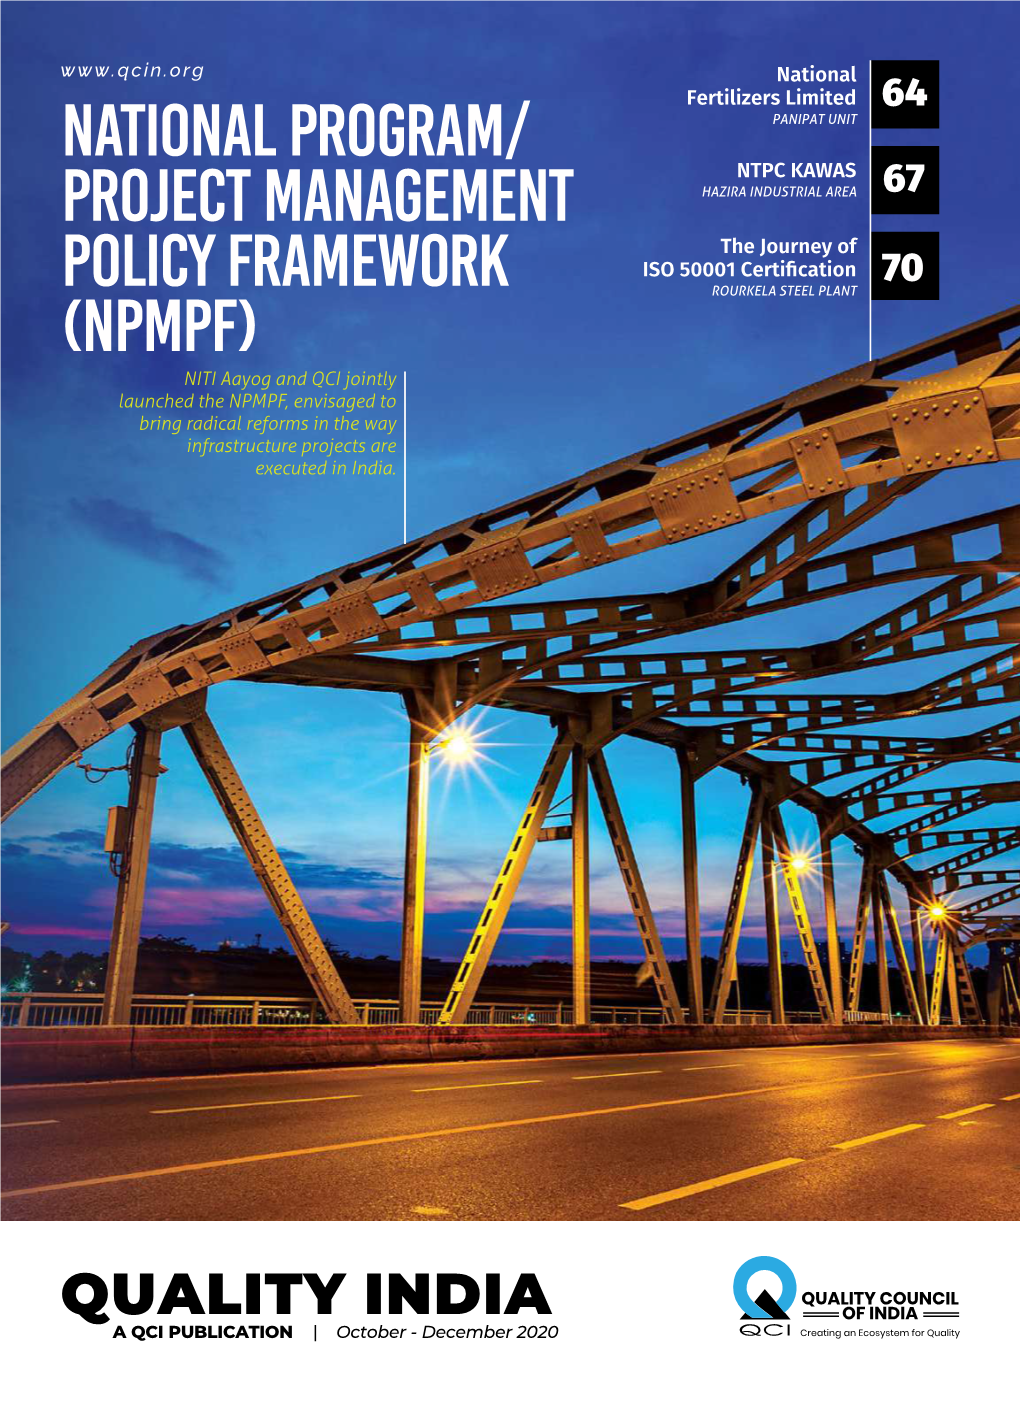 Project Management Policy Framework (Npmpf)